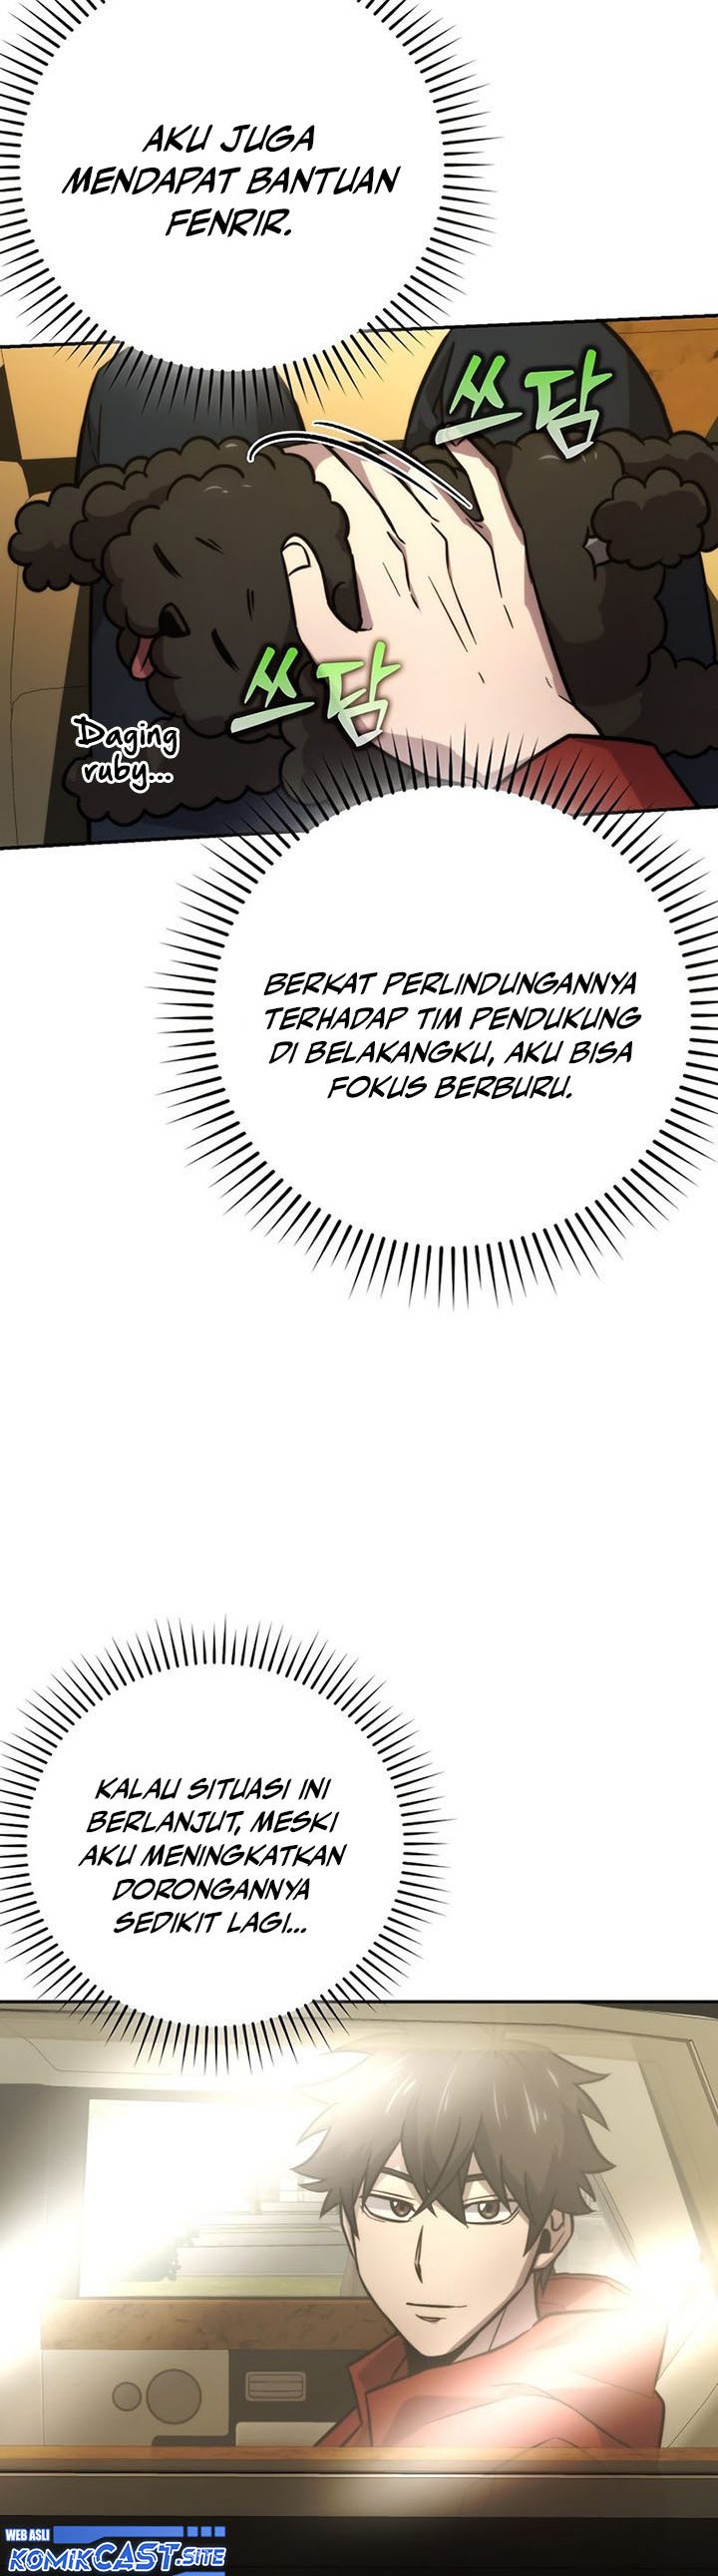 Demon Lord’s Martial Arts Ascension Chapter 41